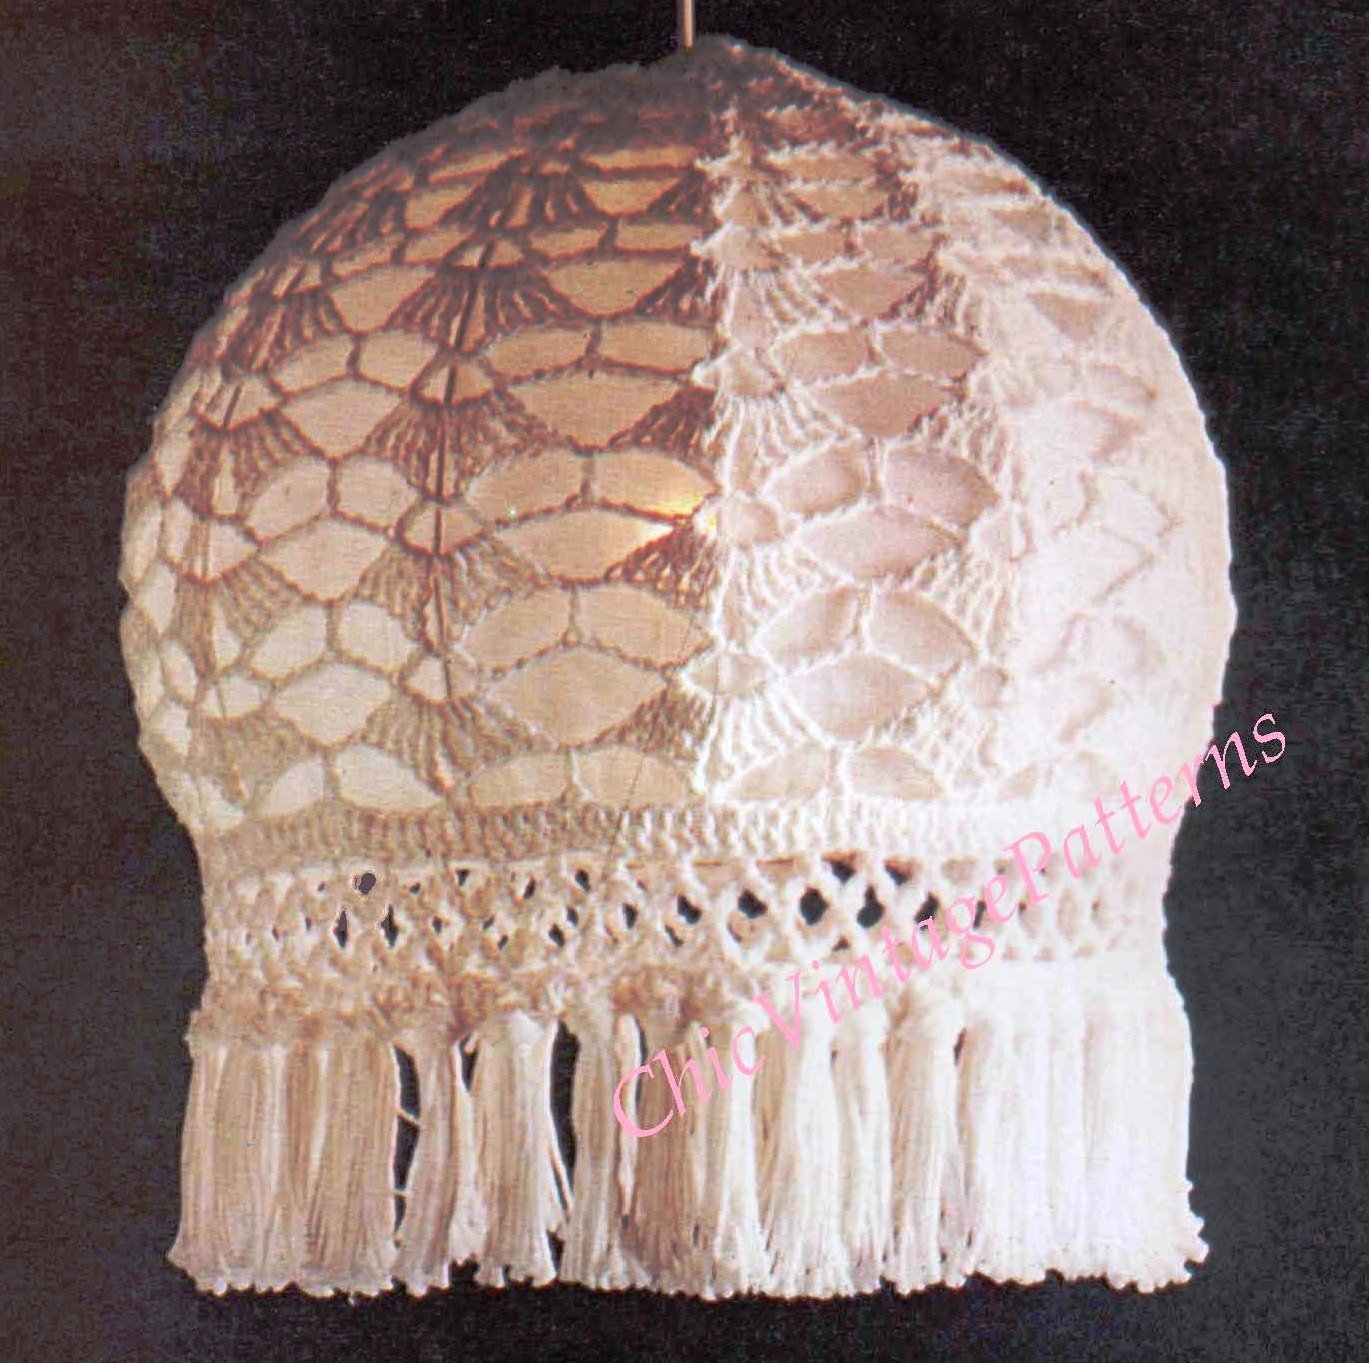 How To Make A Crochet Lampshade, Instant Download Pattern